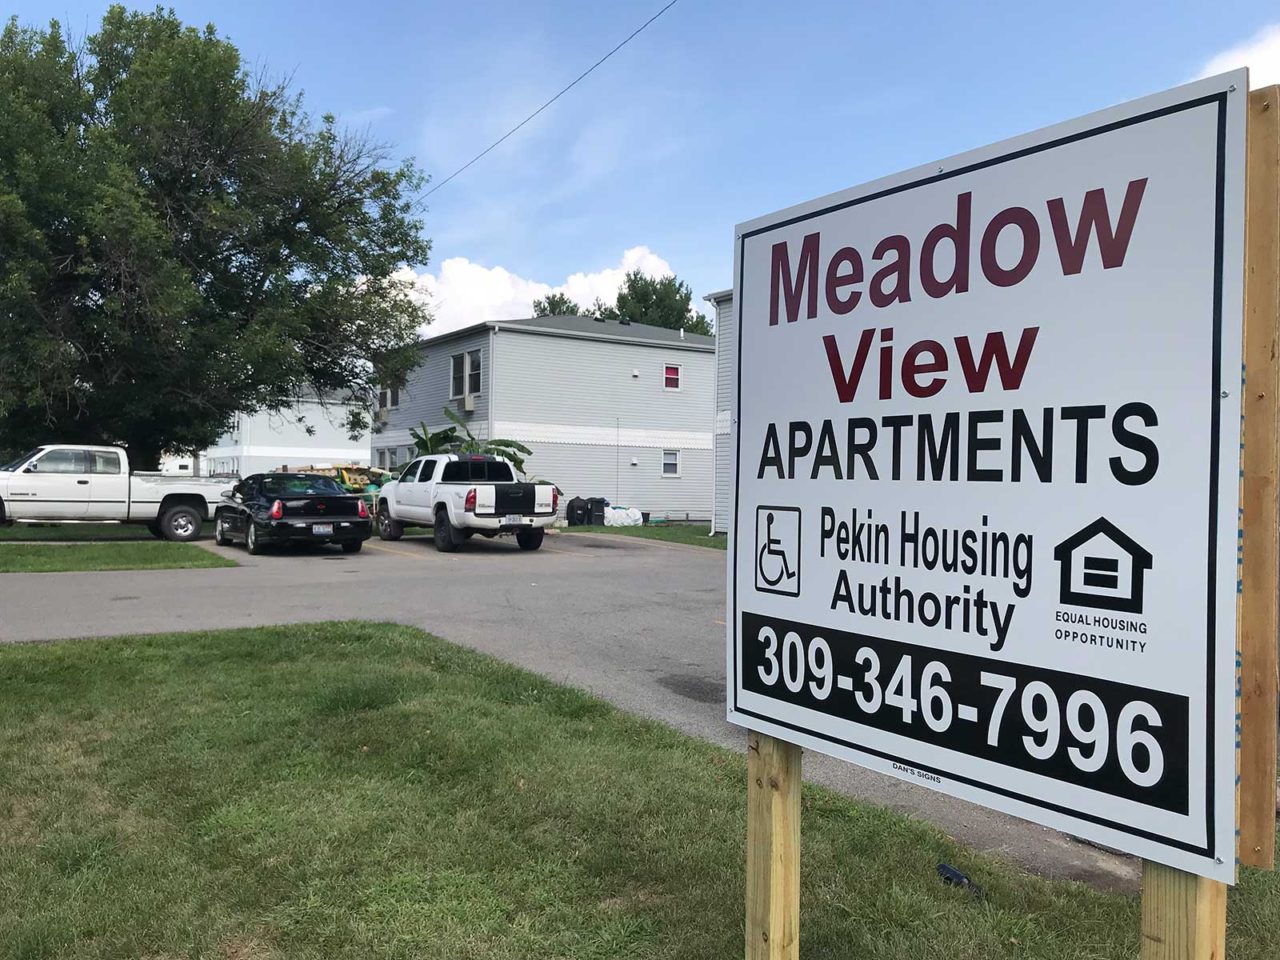 MEADOW VIEW APARTMENTS